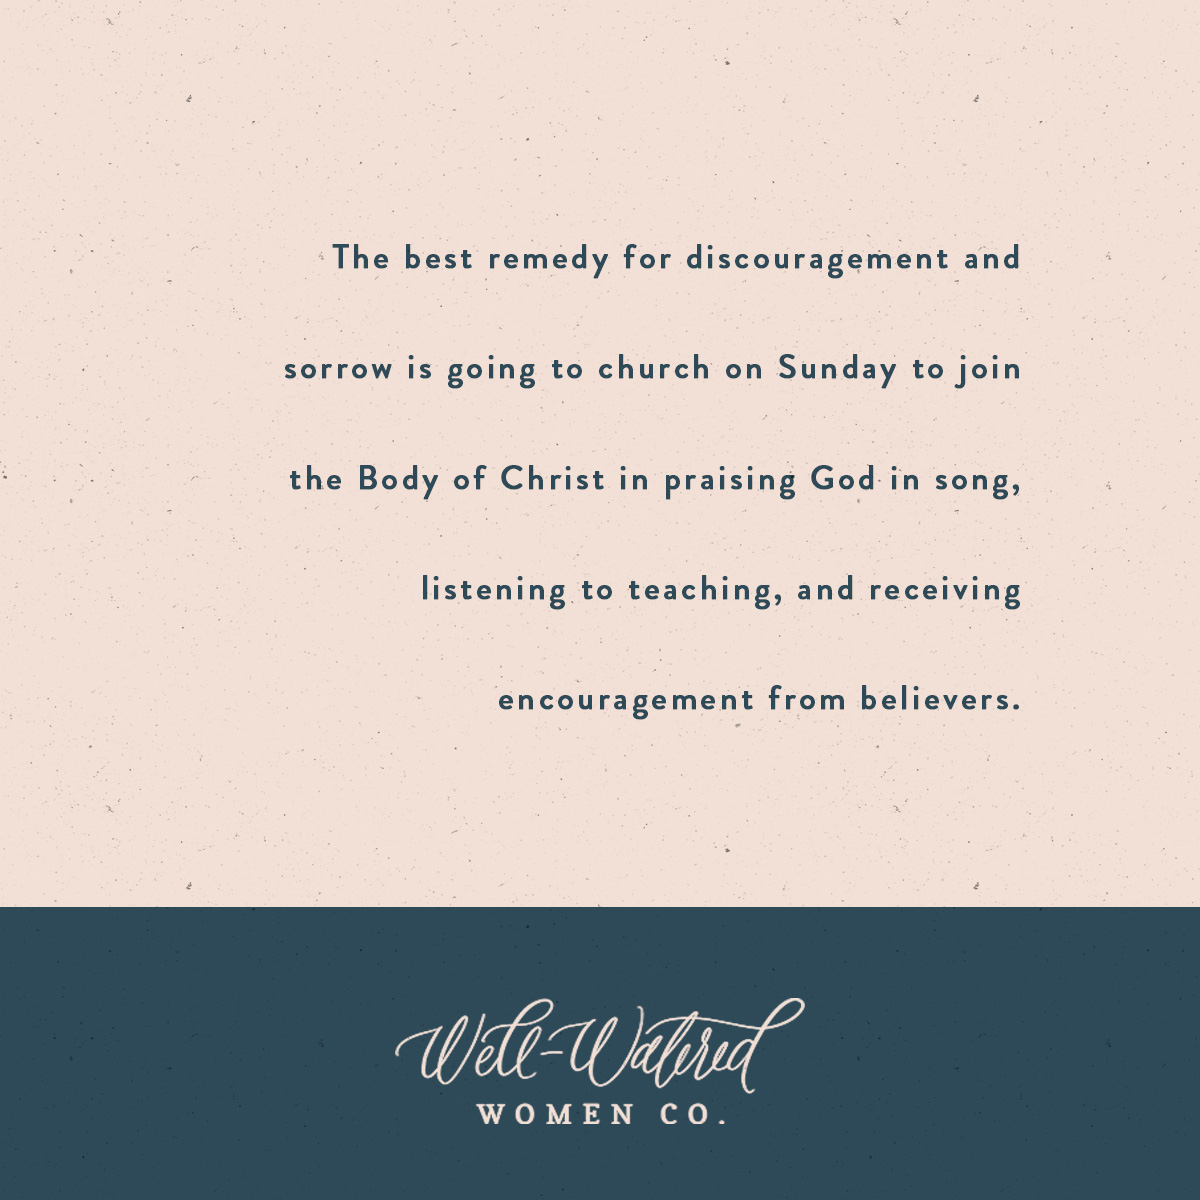 The Best Remedy for Discouragement Is Pursuing Community in the Body